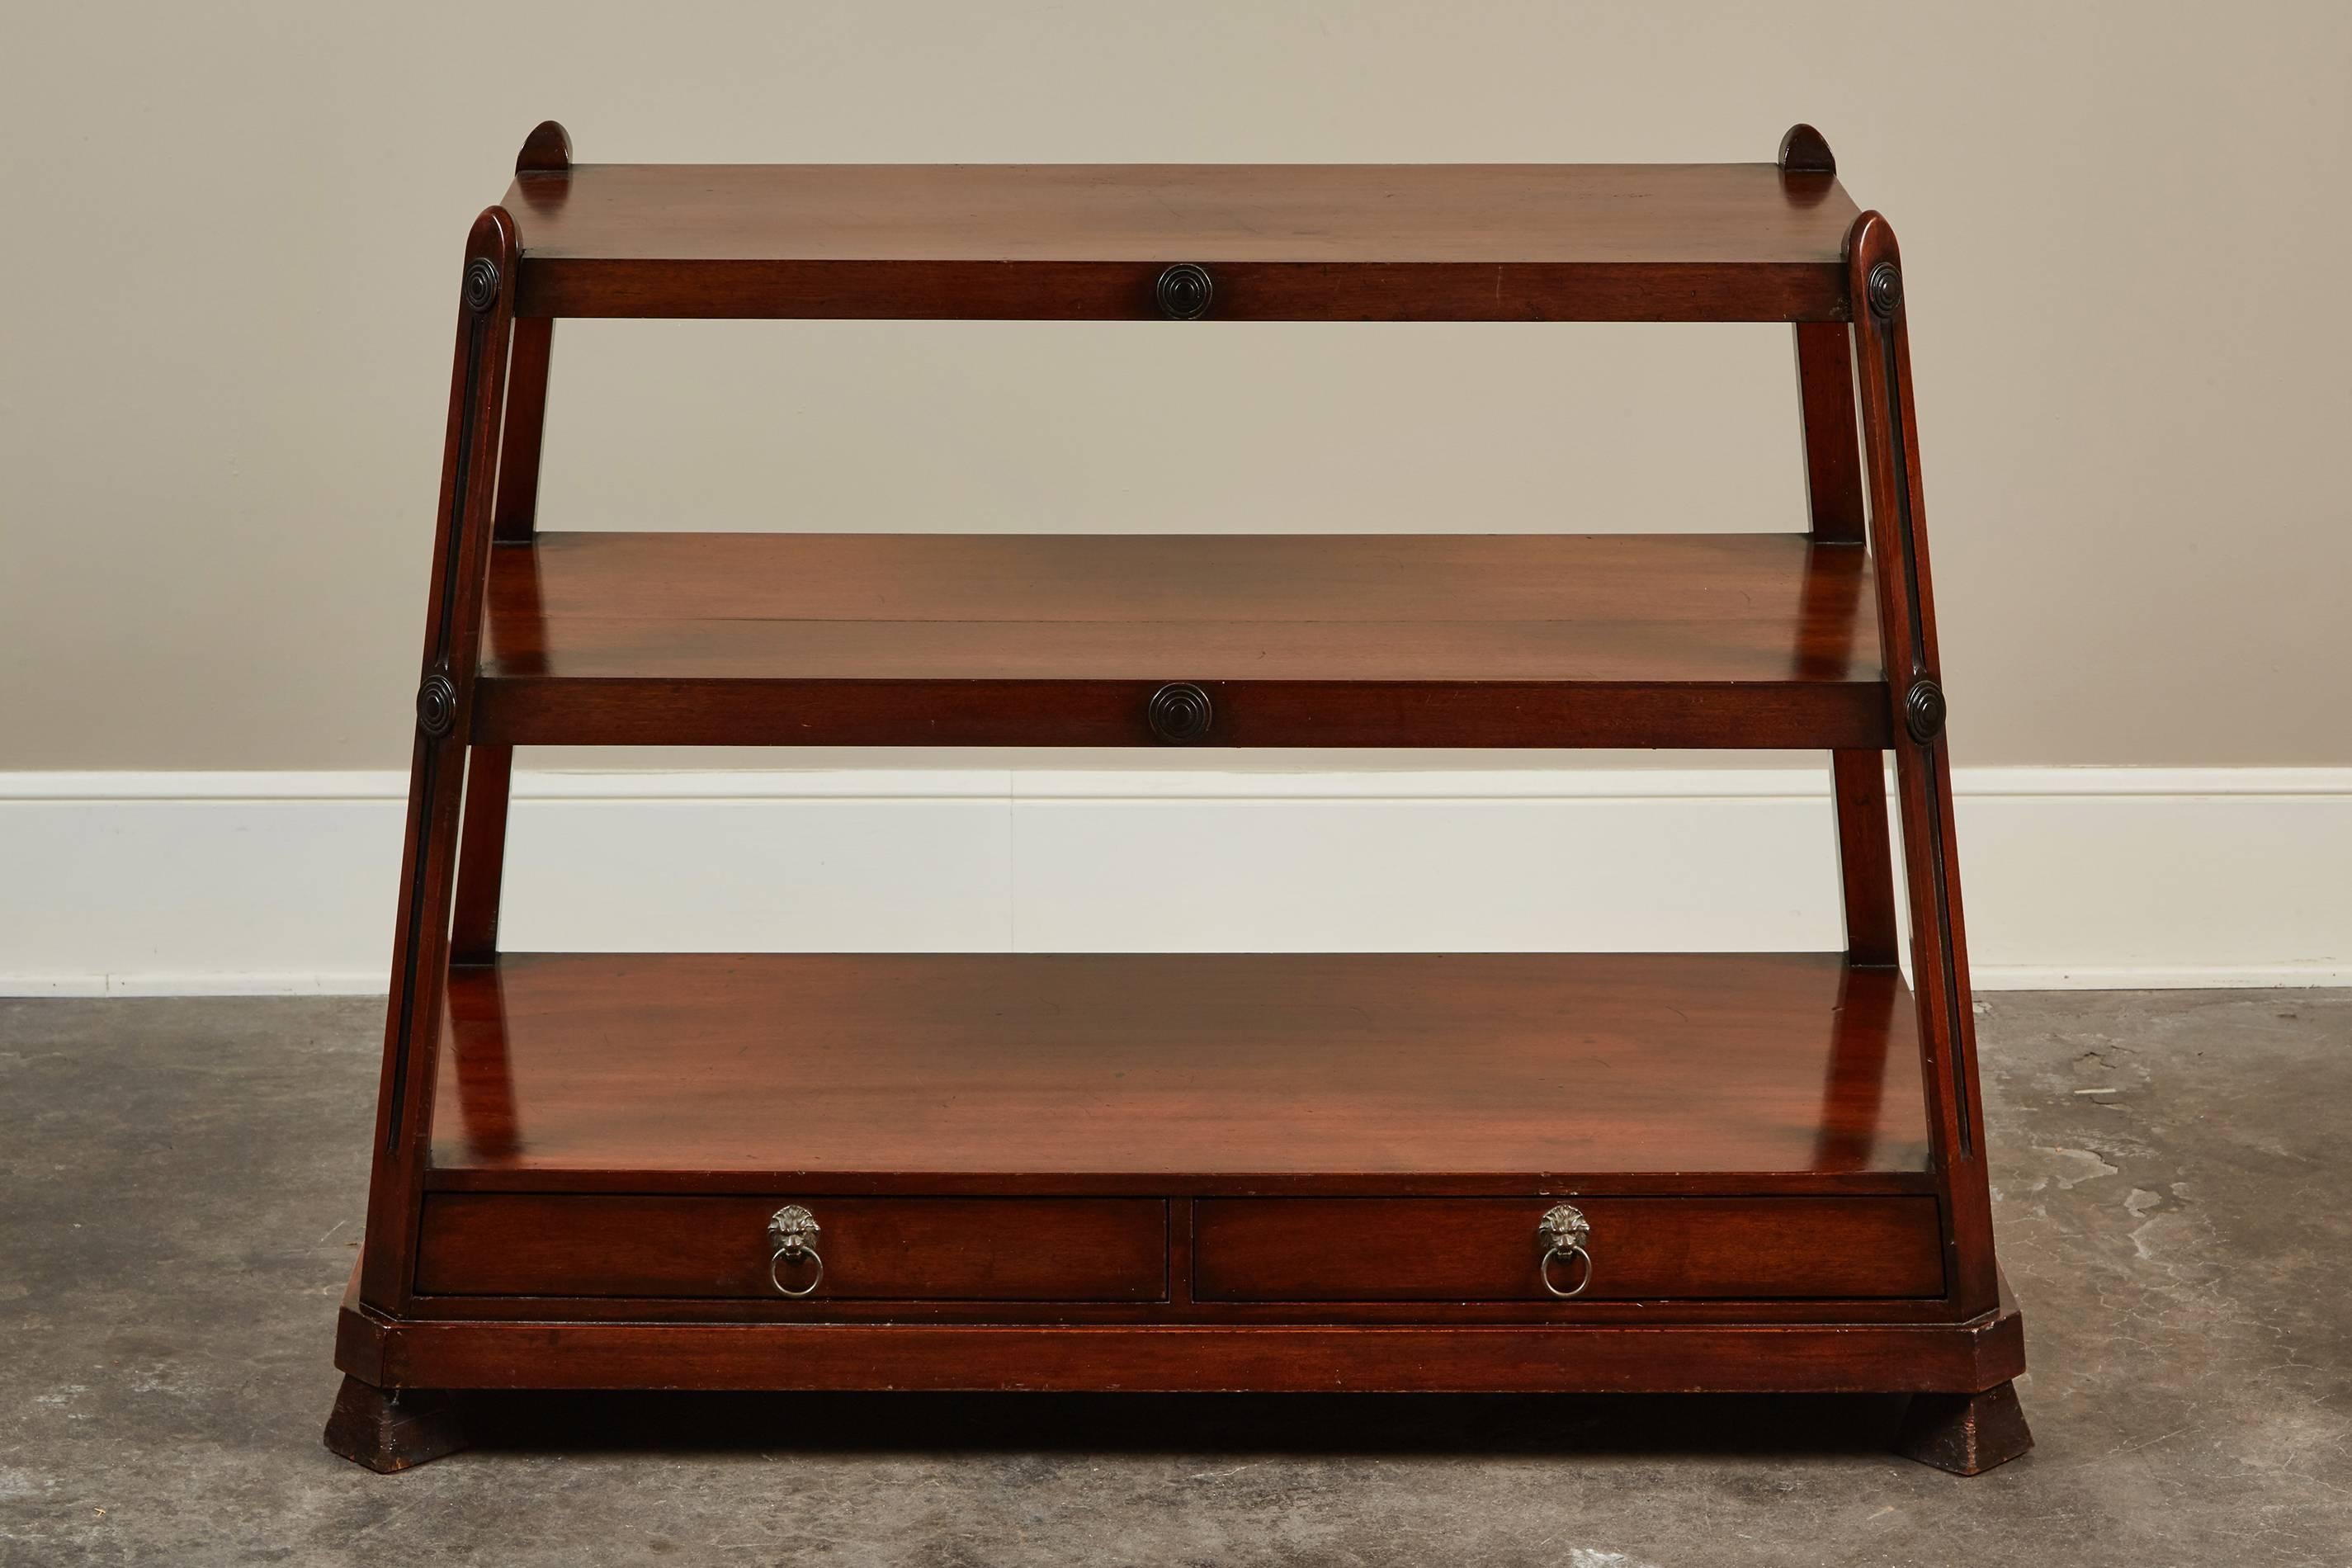 A unusual English mahogany three-tier server with two drawers. The server features slanted legs that rise up to the top and at the base there are two drawers with lion head hardware.